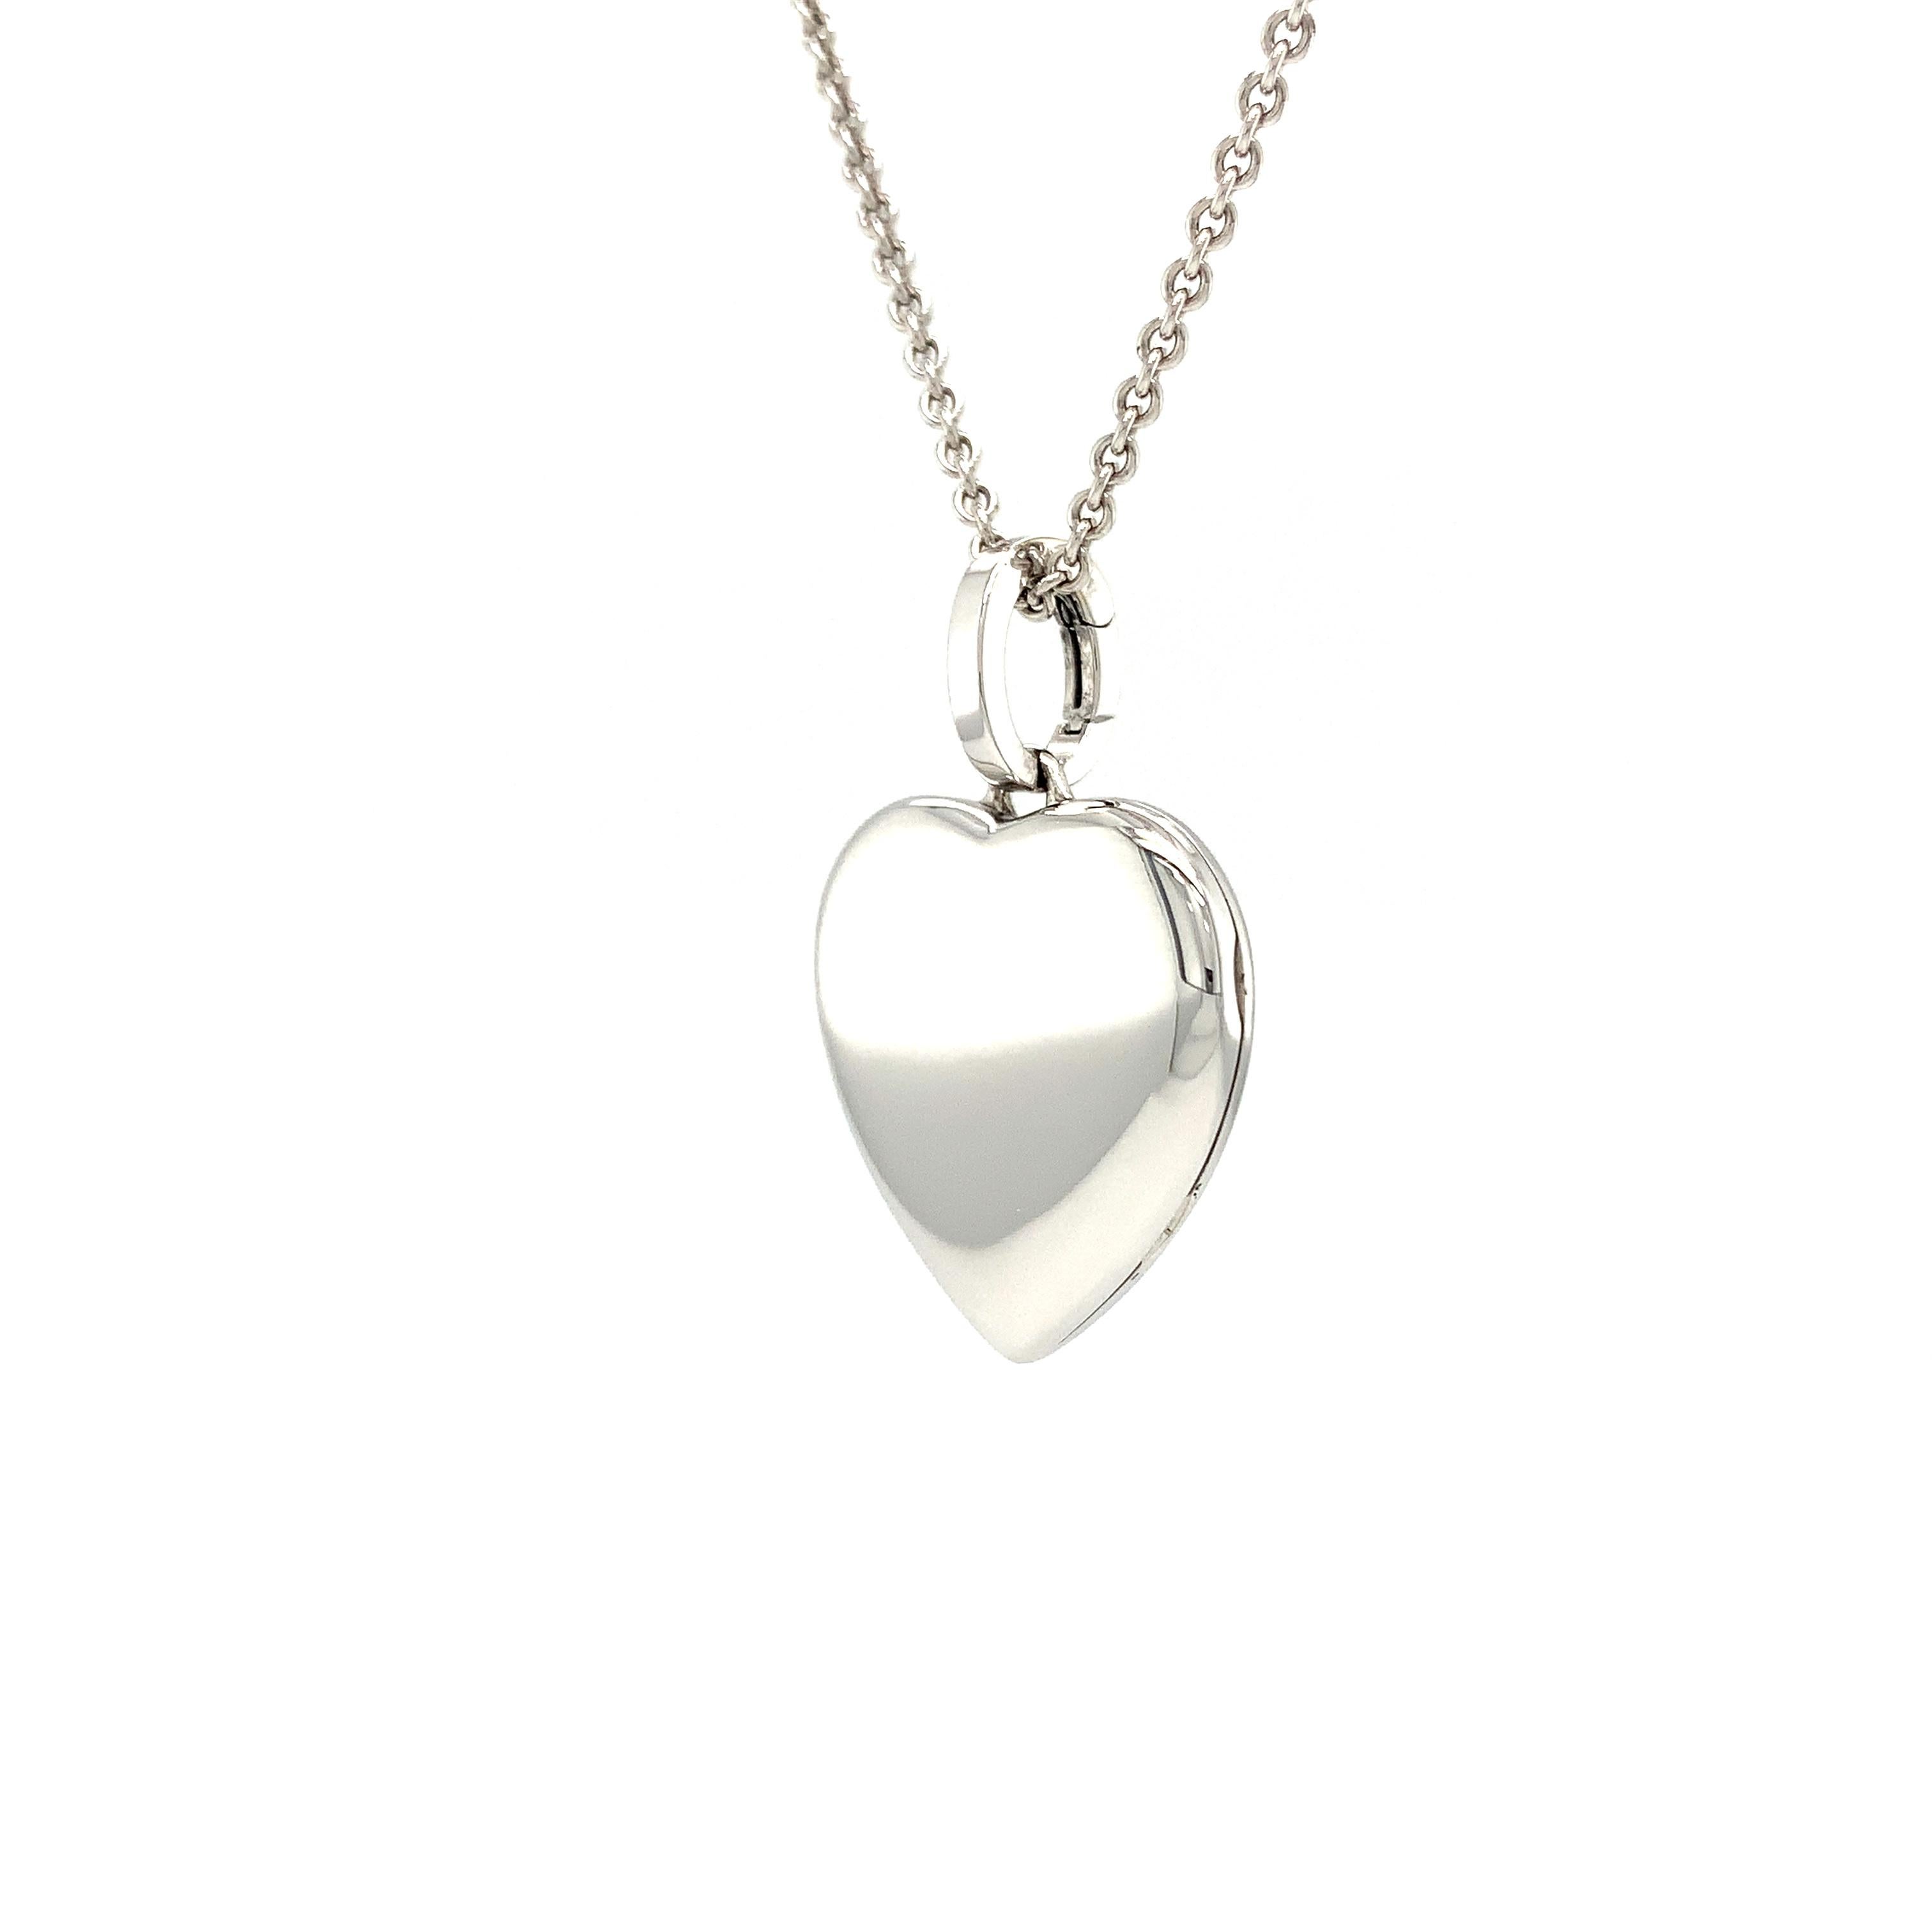 Victor Mayer customizable heart shaped locket pendant, polished  18k white gold, Hallmark collection, measurements app. 23.0 mm x 25.0 mm

About the creator Victor Mayer
Victor Mayer is internationally renowned for elegant timeless designs and